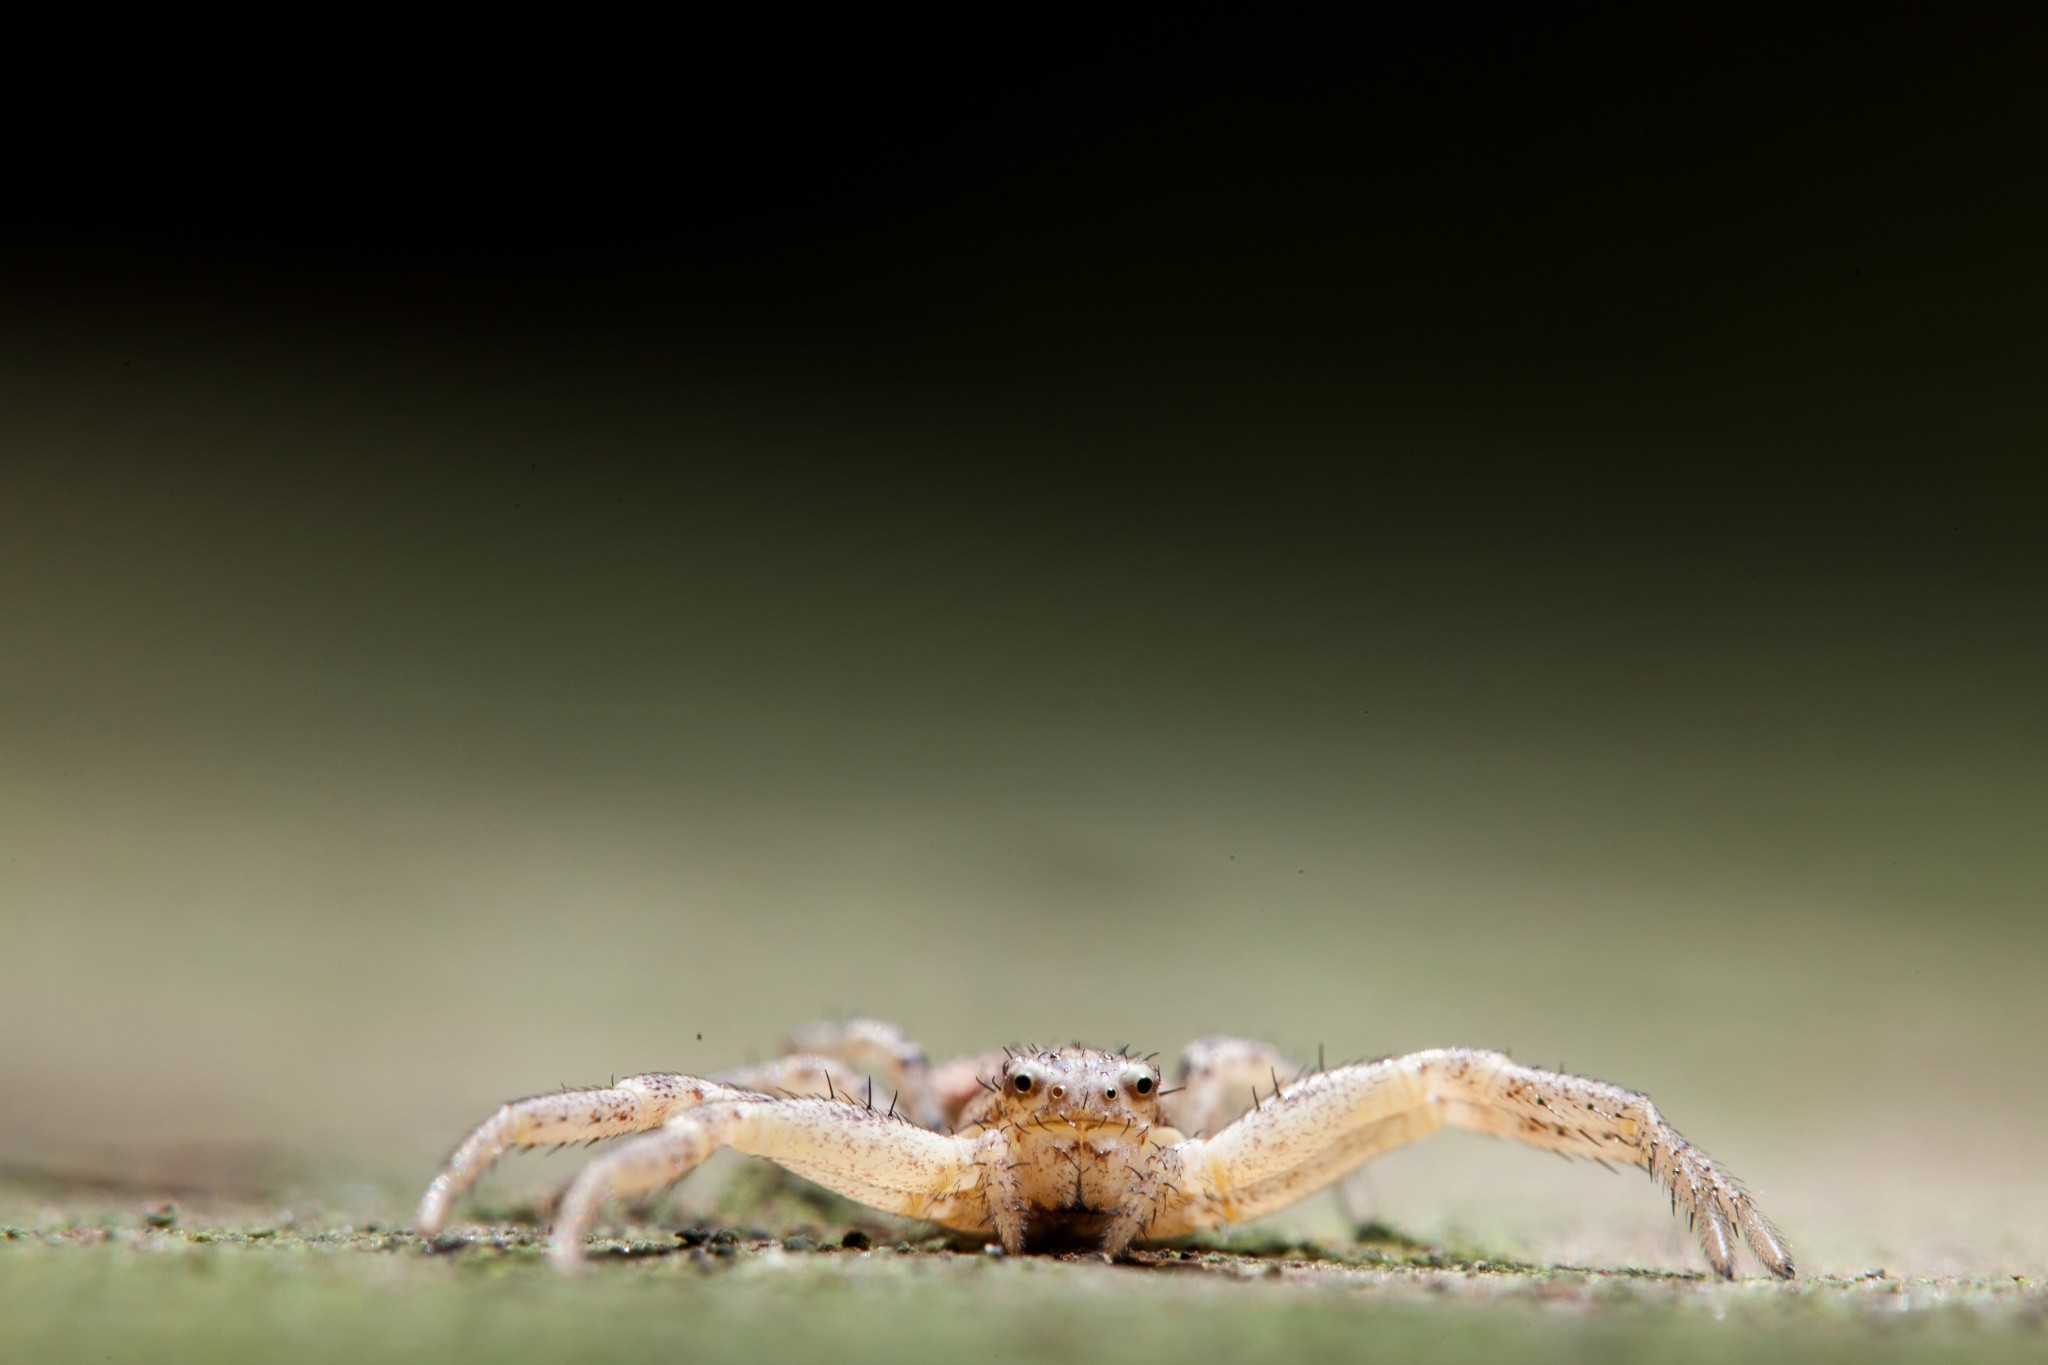 General 2048x1365 photography macro spider white depth of field nature animals